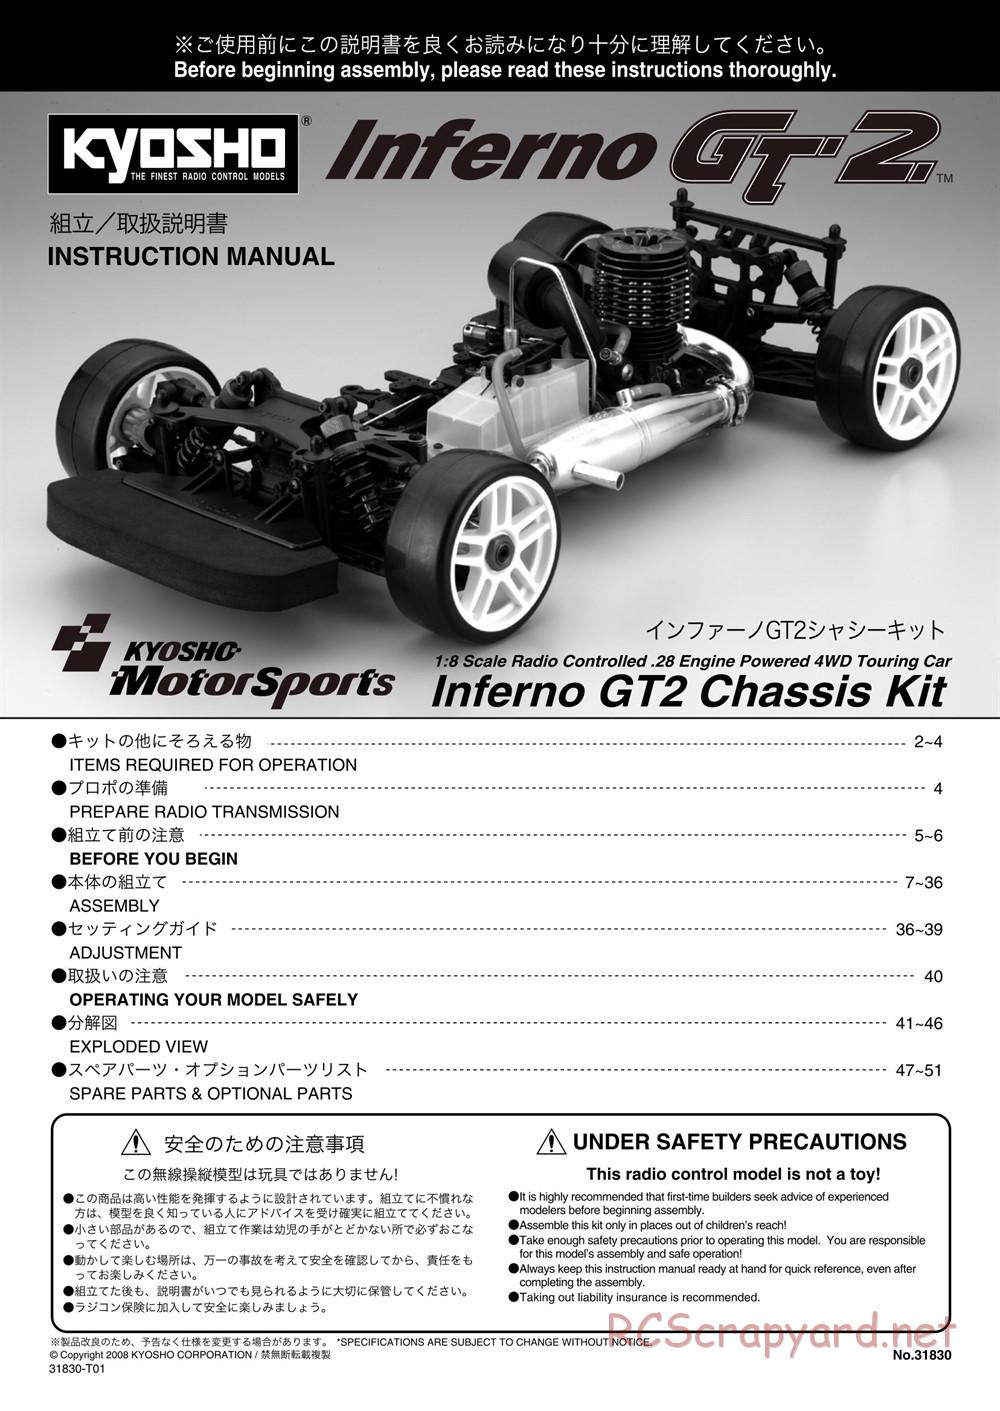 Kyosho - Inferno GT2 - Manual - Page 1